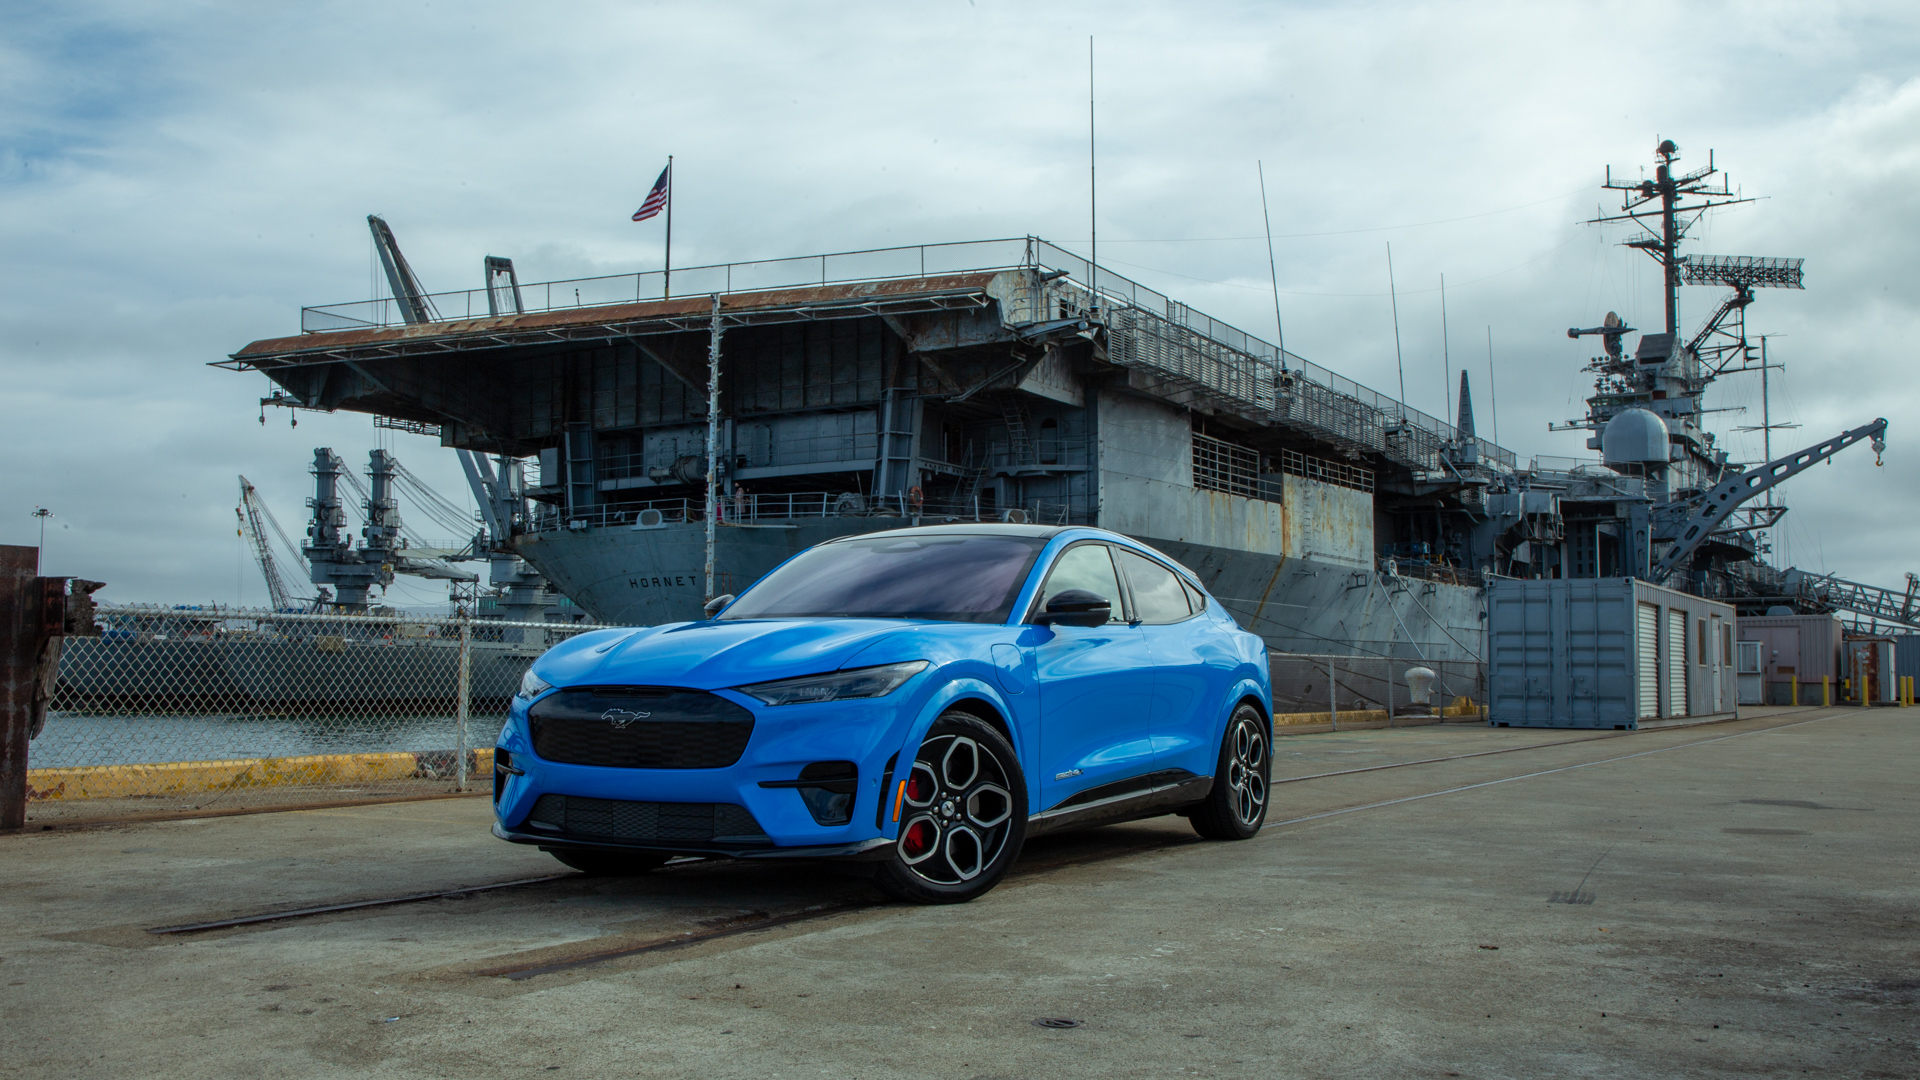 First drive review: 2021 Ford Mustang Mach-E GT upgrades performance without losing rangeFirst drive review: 2021 Ford Mustang Mach-E GT upgrades performance without losing range